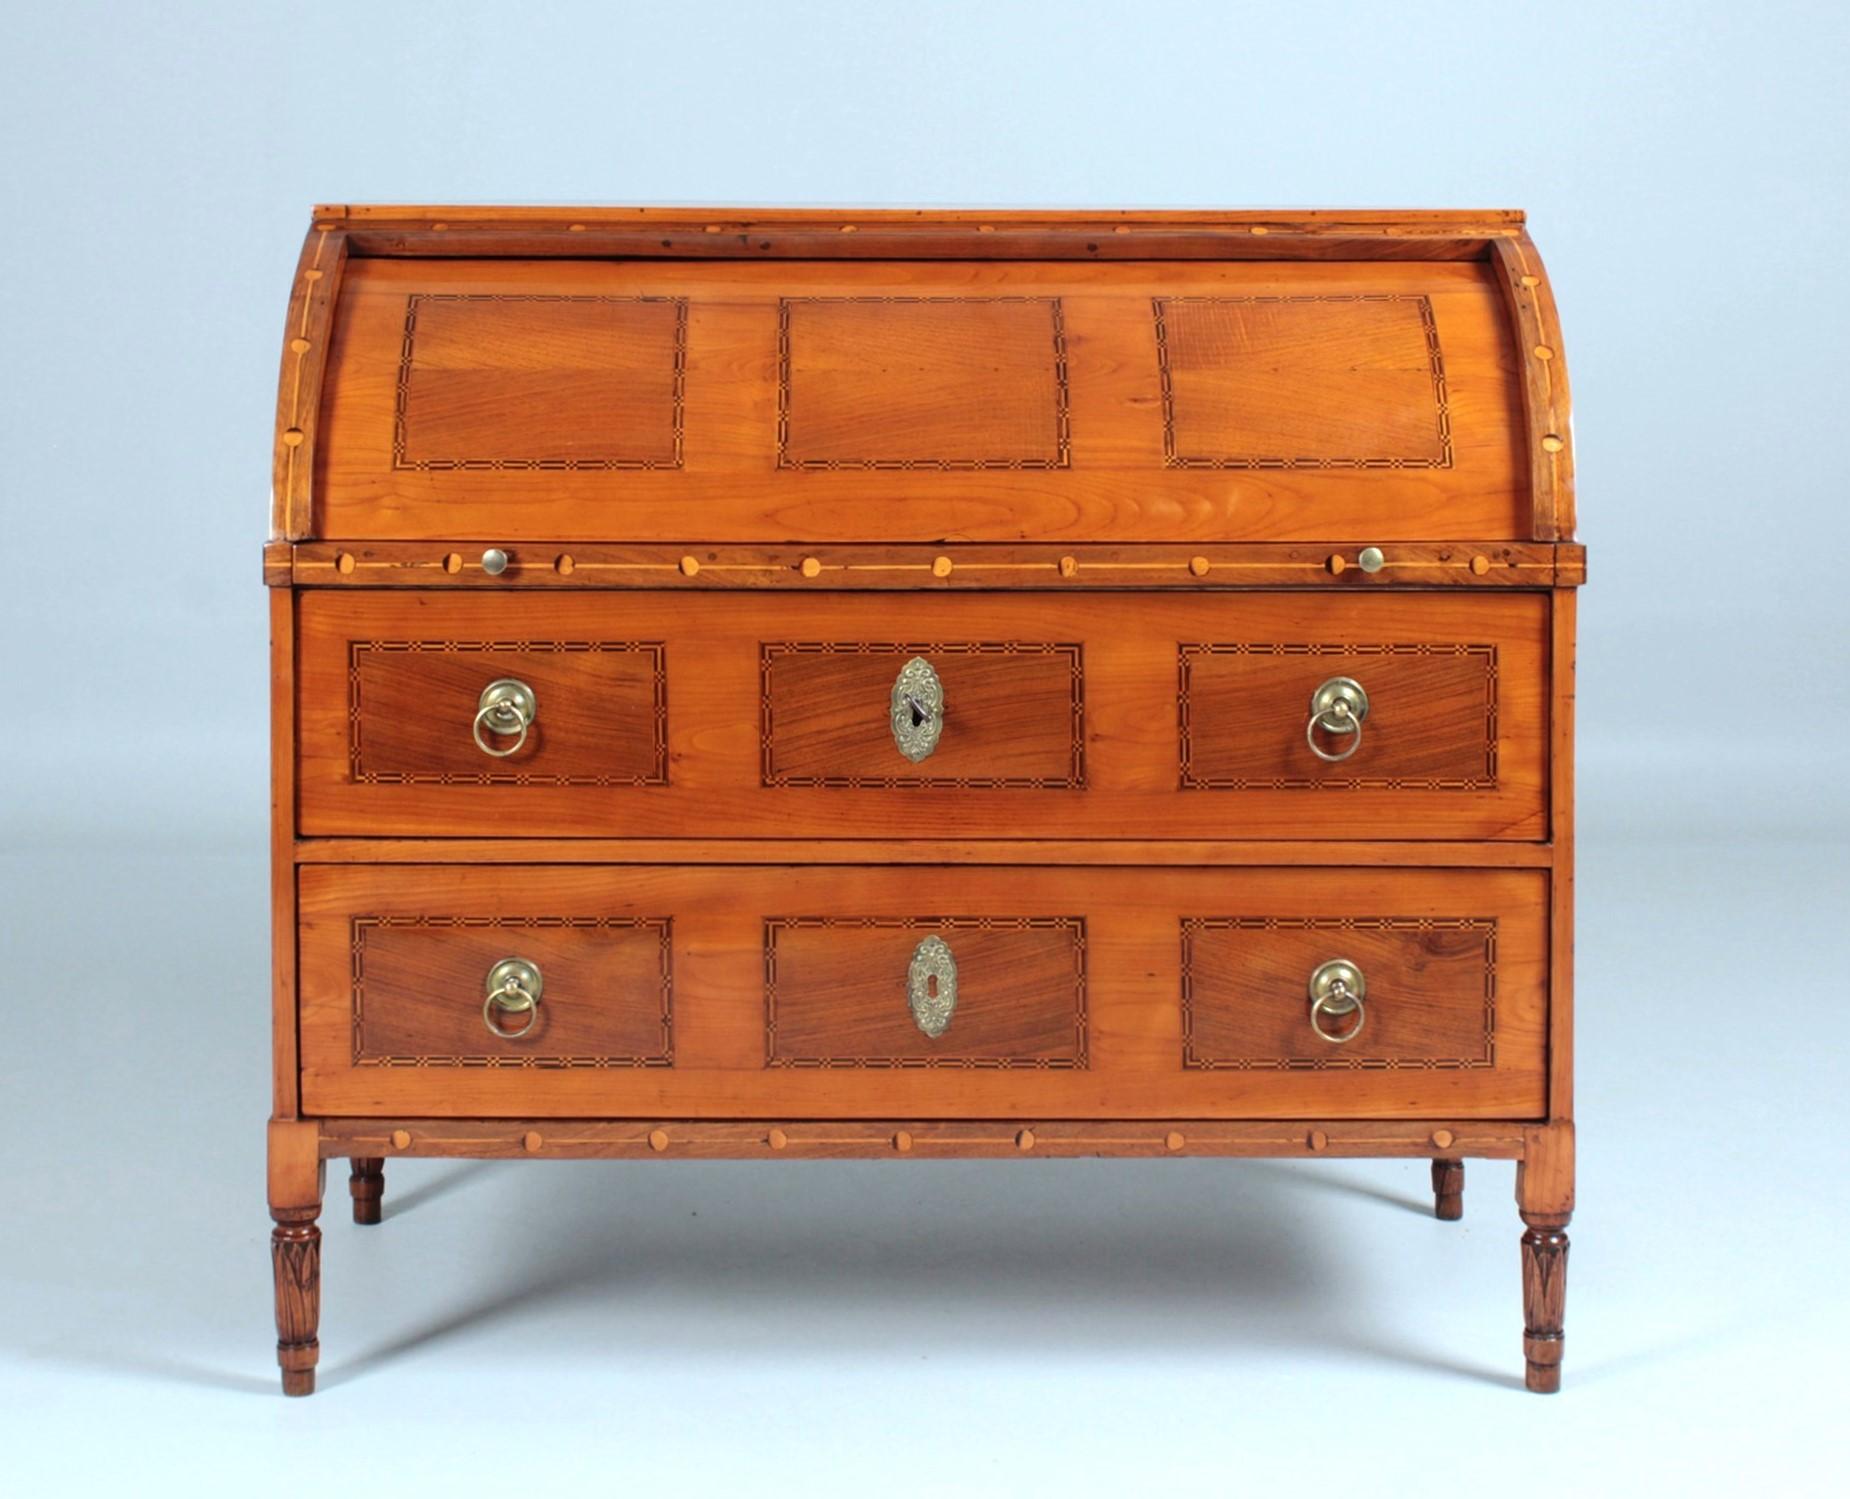 Louis XVI cylinder secretary

Bavaria
Cherry, walnut
Louis XVI circa 1790

Dimensions: H x W x D: 111 x 119 x 60 cm

Description:
Well proportioned writing desk standing on carved round feet.

The bureau consists of one piece, but is visually